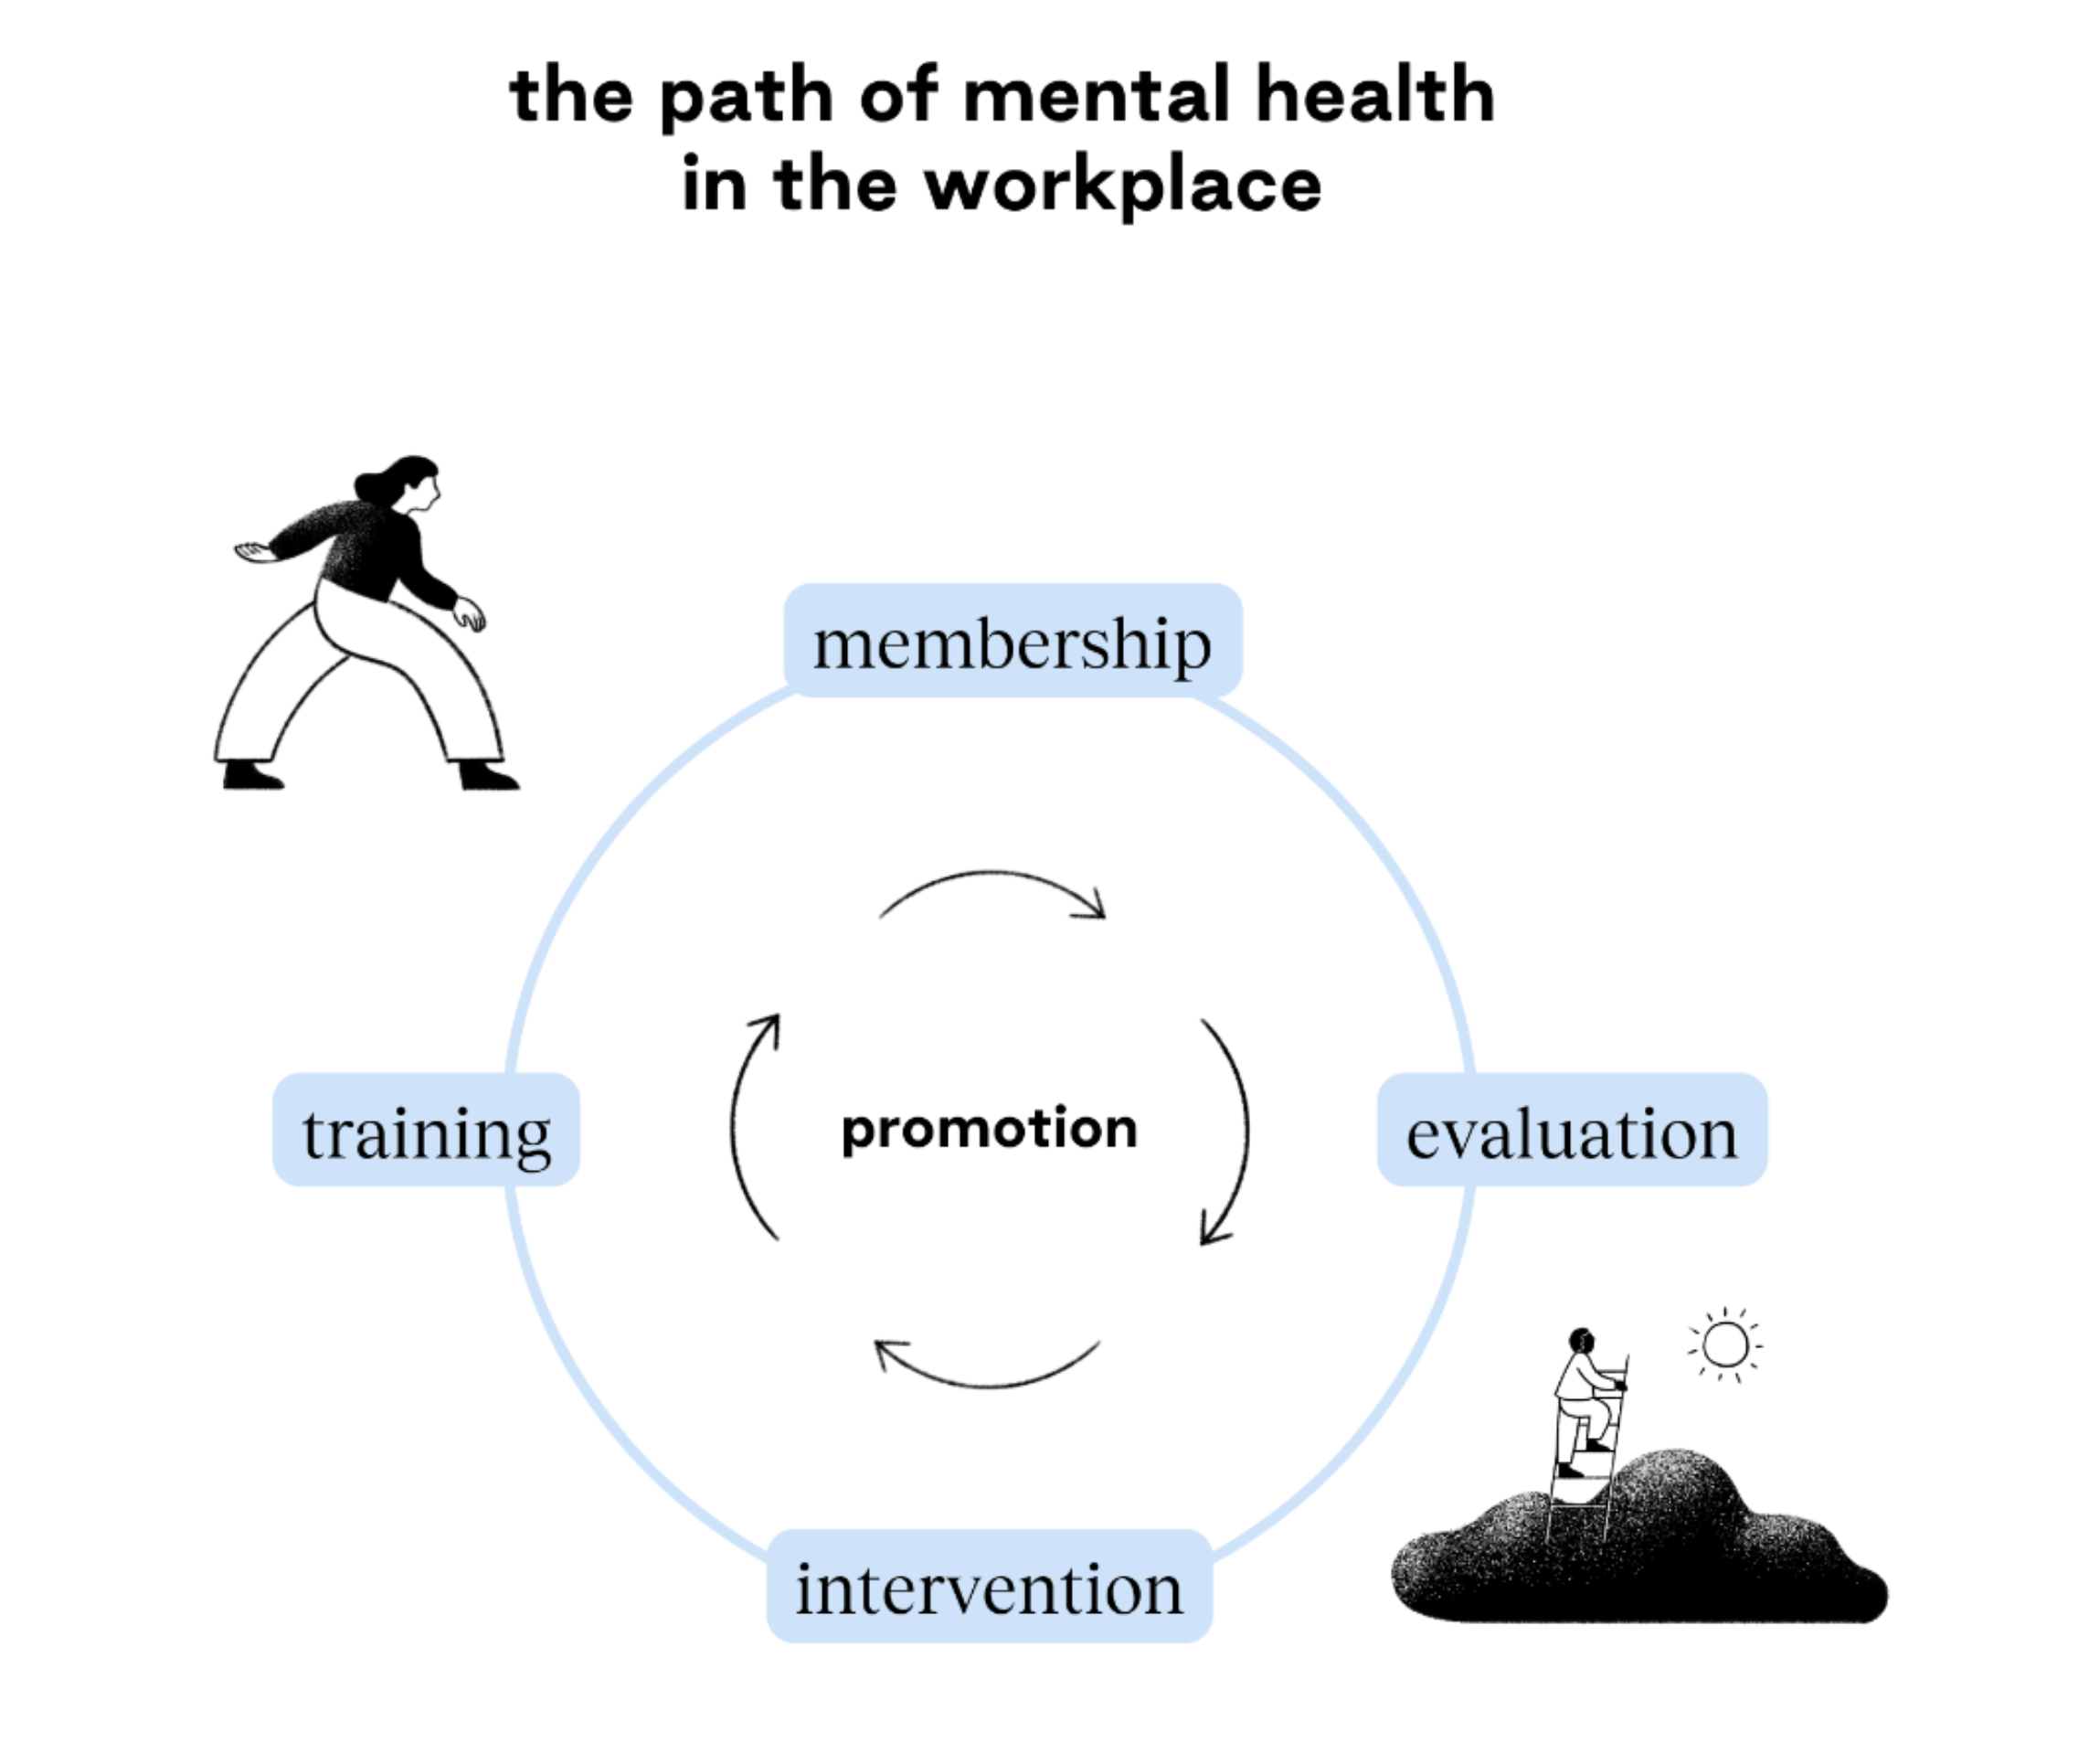 The path to mental health